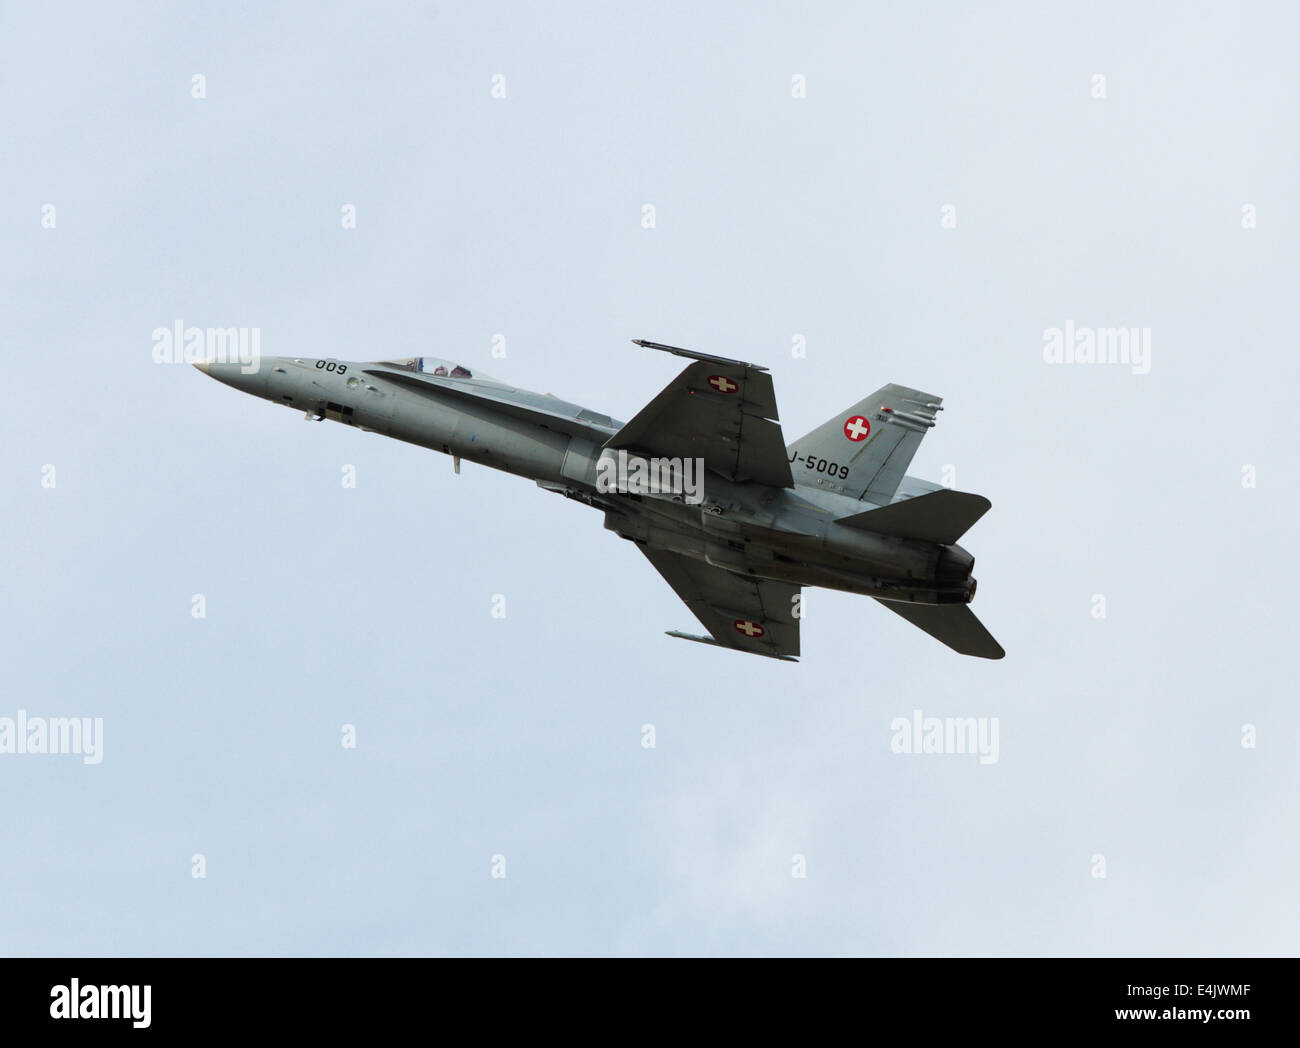 Fairford, Gloucs, UK. 12th July, 2014. Swiss air defence force F-18C Hornet jet fighter aircraft displaying at the 2014 Royal International Air Tattoo at RAF Fairford on 12 July. Credit:  Niall Ferguson/Alamy Live News Stock Photo